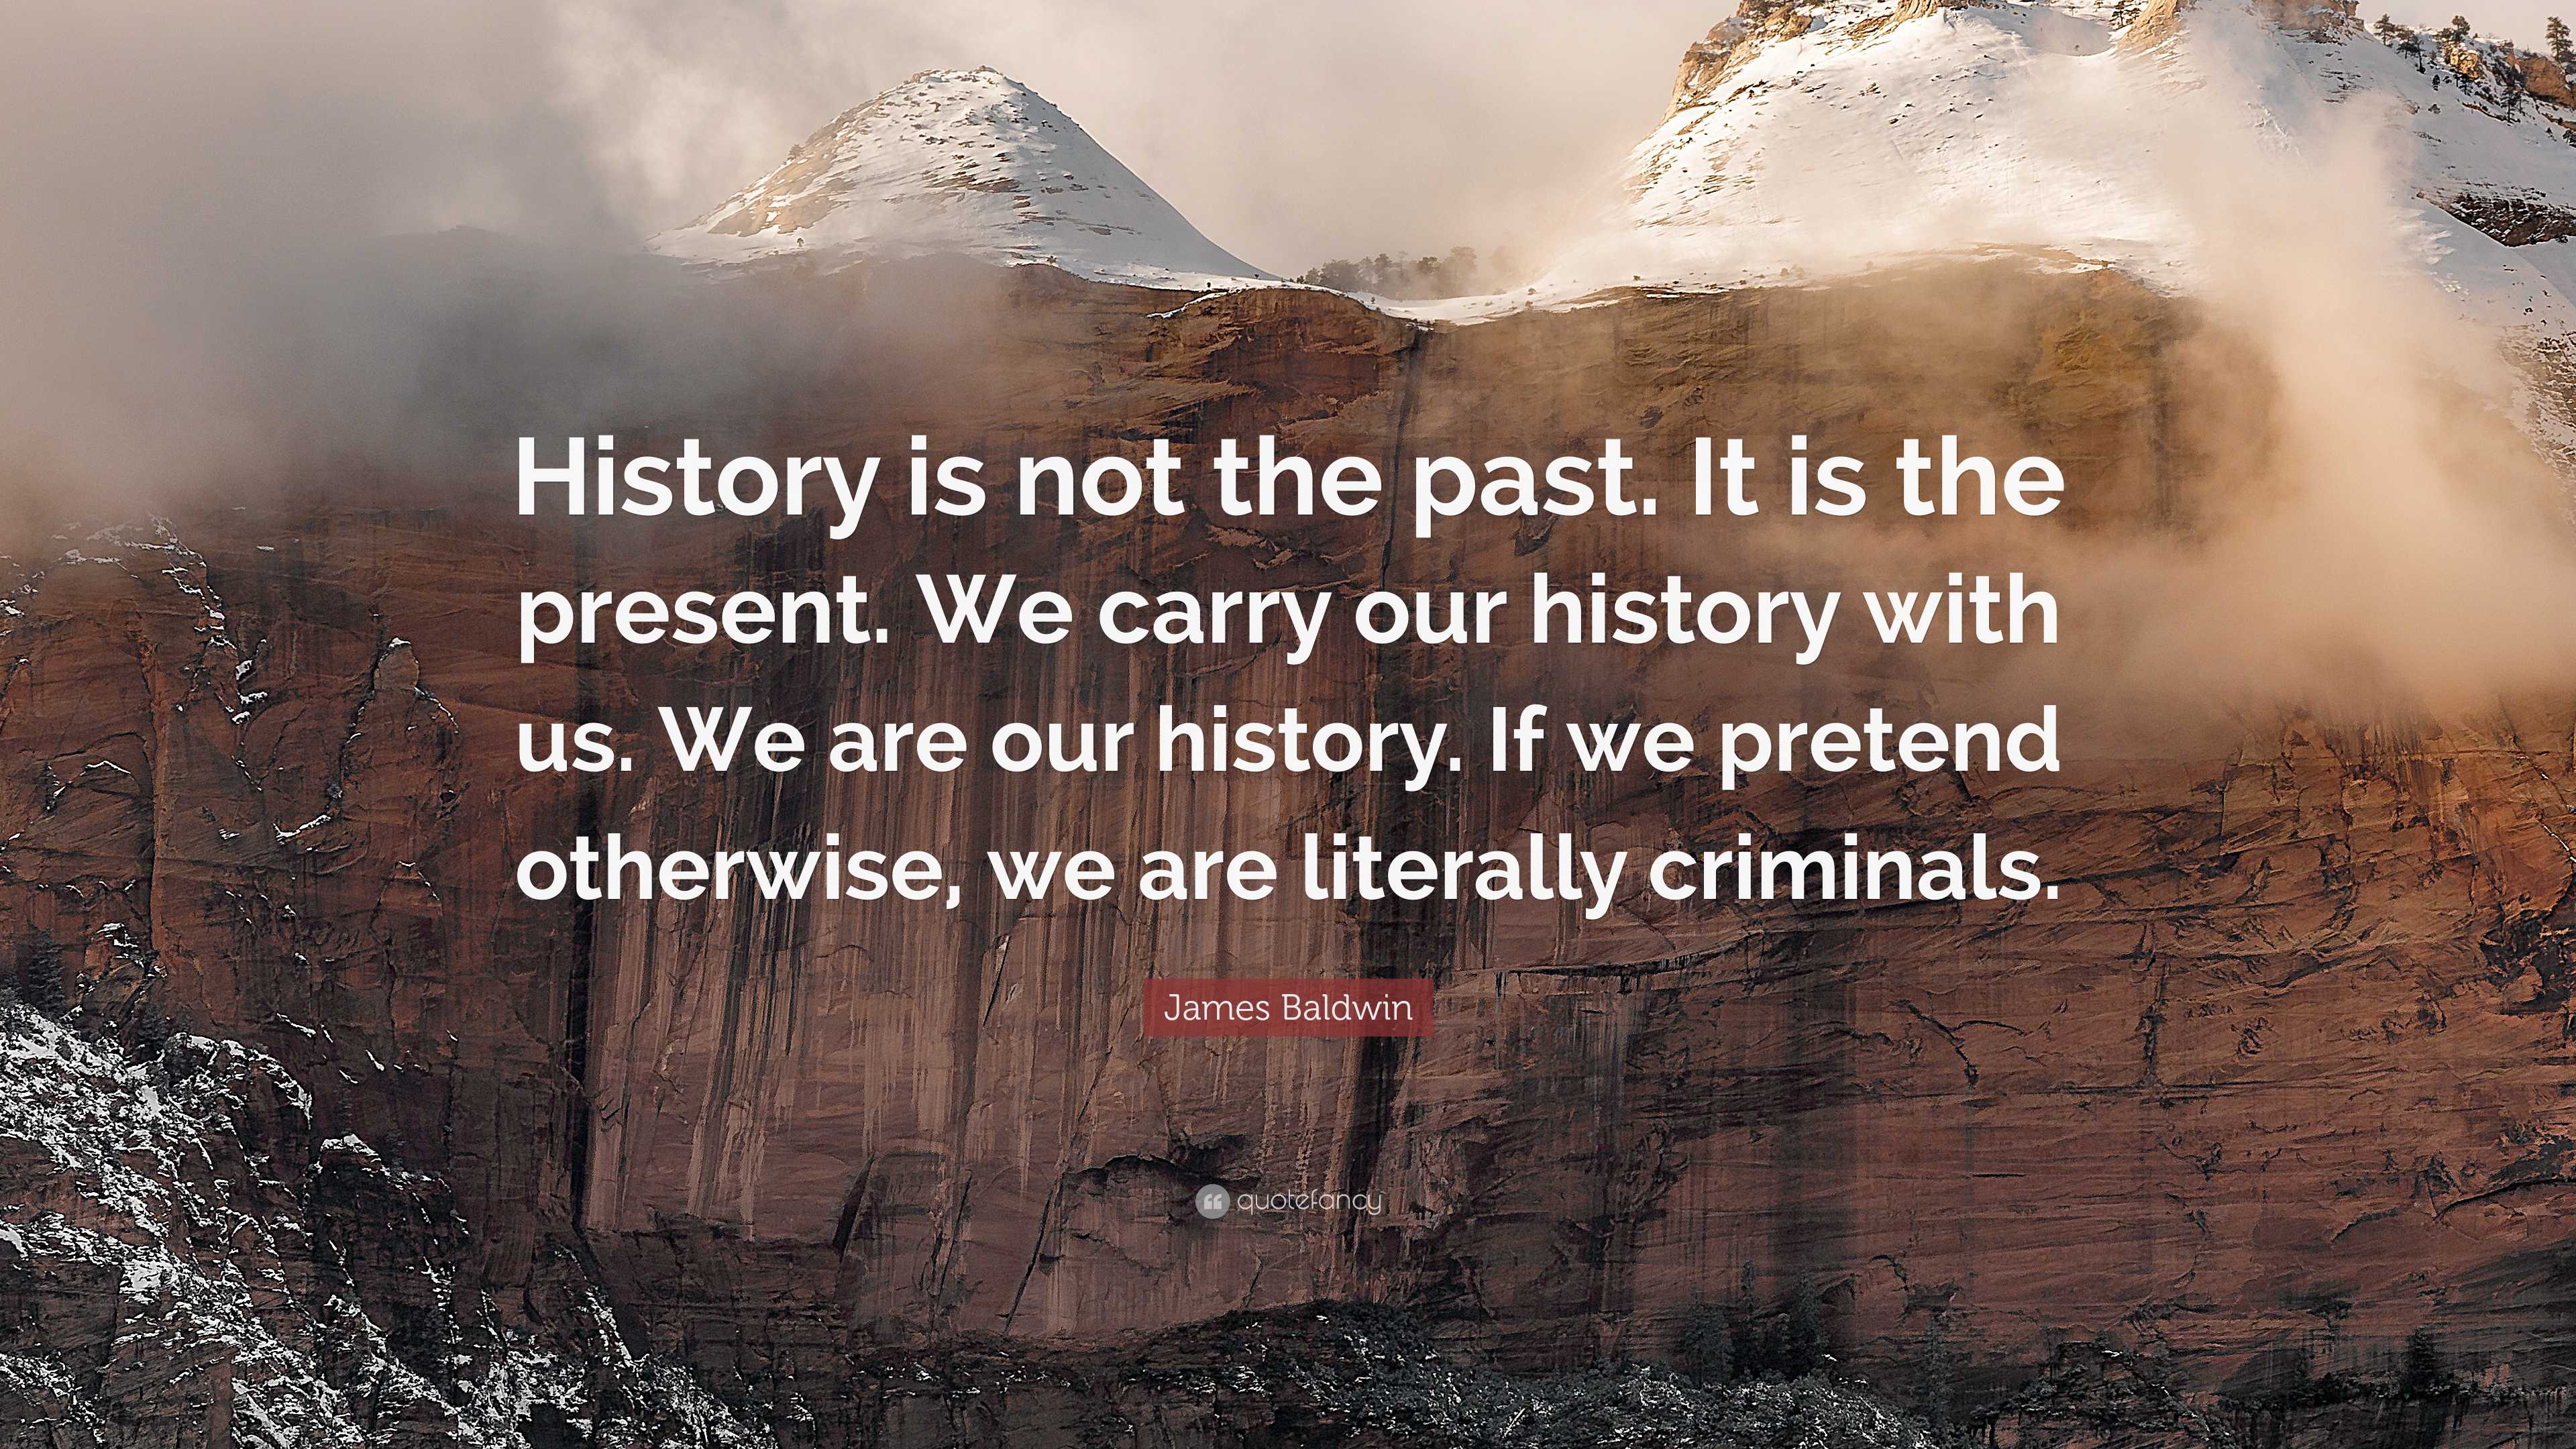 James Baldwin Quote: “History is not the past. It is the present